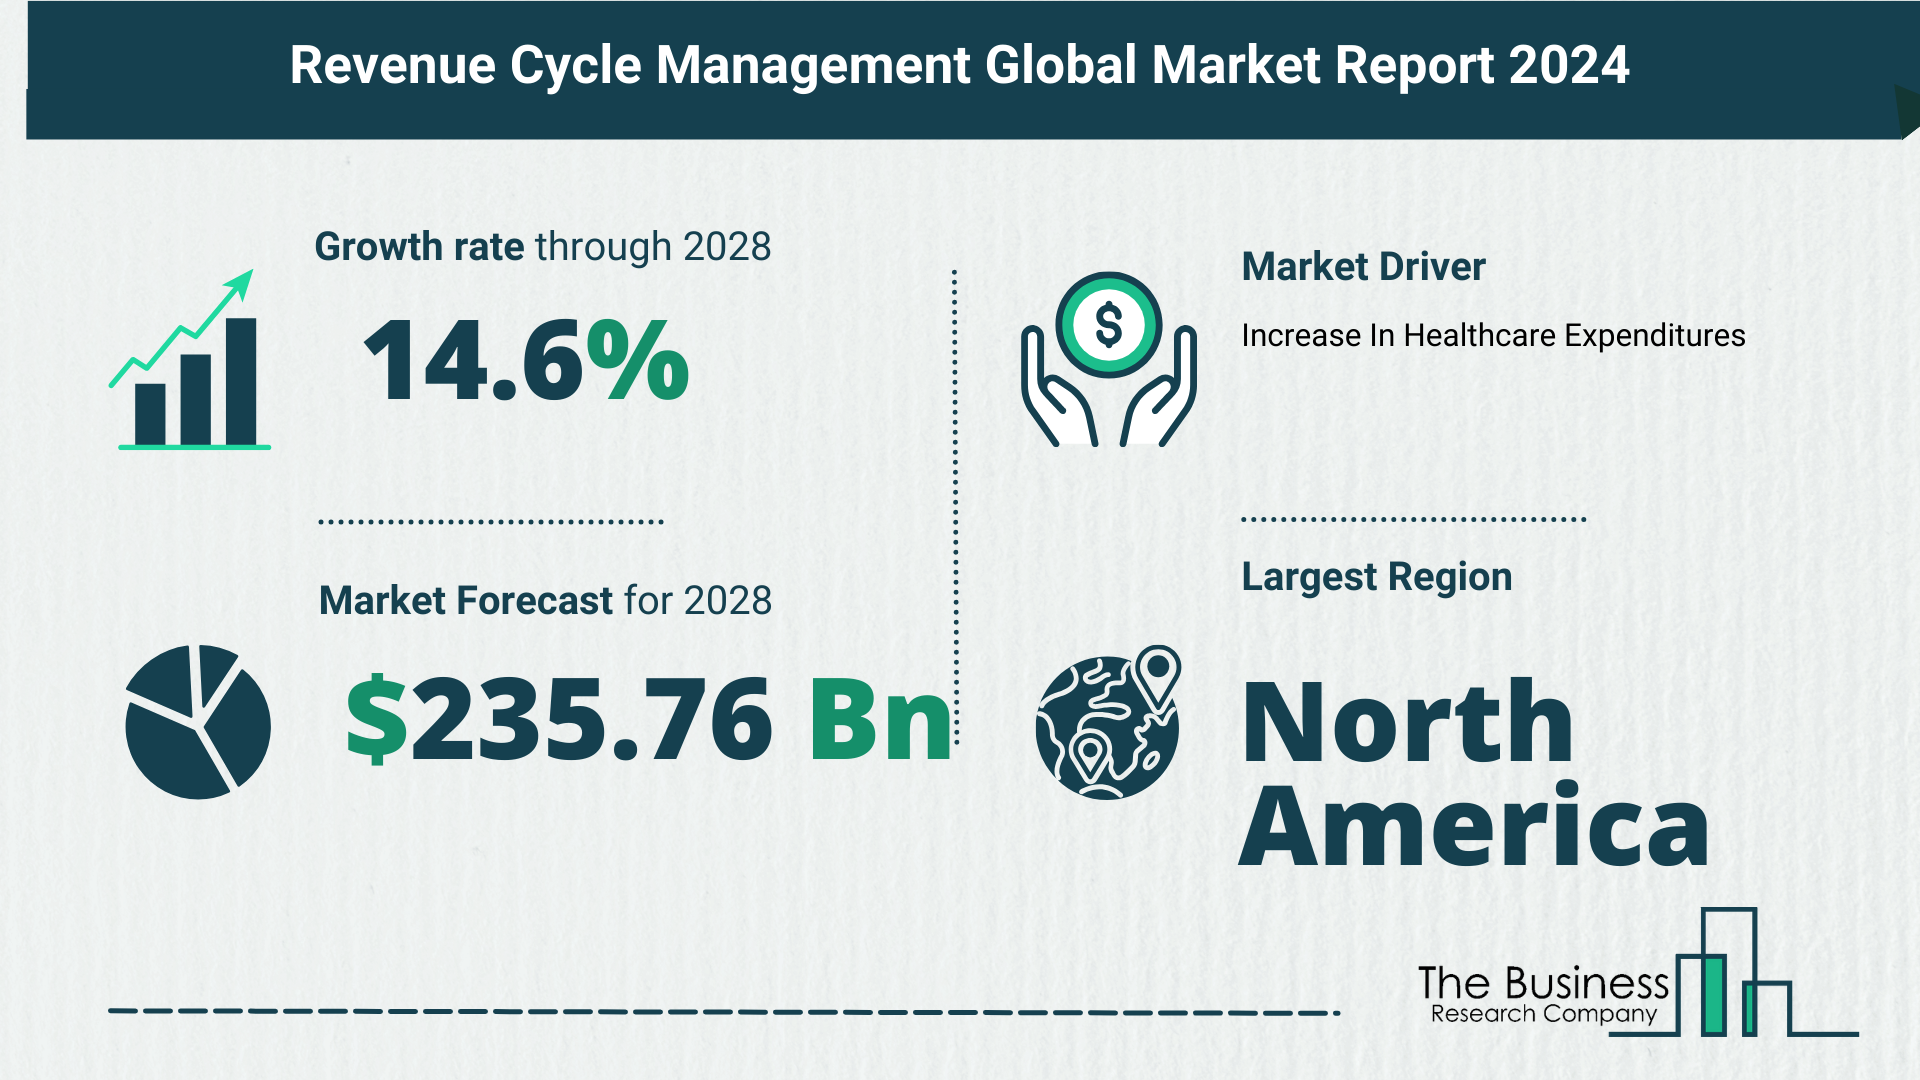 What Is The Forecast Growth Rate For The Revenue Cycle Management (RCM) Market?